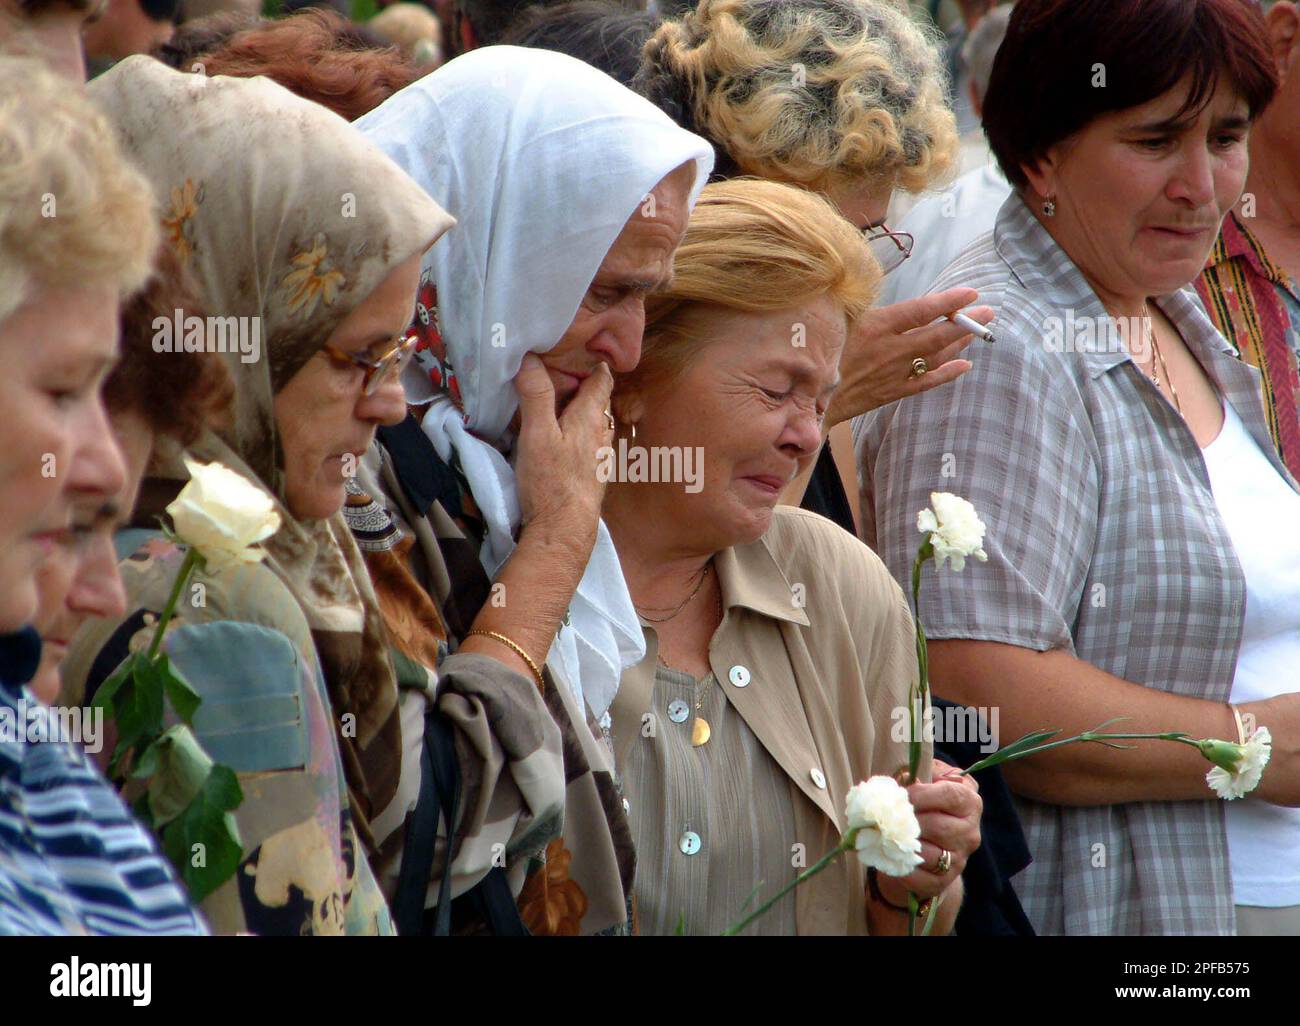 Muslim women praying and crying as they remember loved ones killed during the Bosnian war, at a ceremony in Koricanske Stijene on Wednesday, Aug. 21, 2002. In August 1992, just a few months into Bosnia's 1992-1995 war, Bosnian Serb police forces and paramilitary troops executed 253 non-Serb men by shooting them and pushing them over a cliff into a ravine, located near the town of Travnik, 70 kilometers (40 miles) northwest of Sarajevo. The victims had been prisoners in the notorious Bosnian Serb-run concentration camps Omarska, Keraterm and Trnopolje. Only 12 men are known to have survived. On Stock Photo